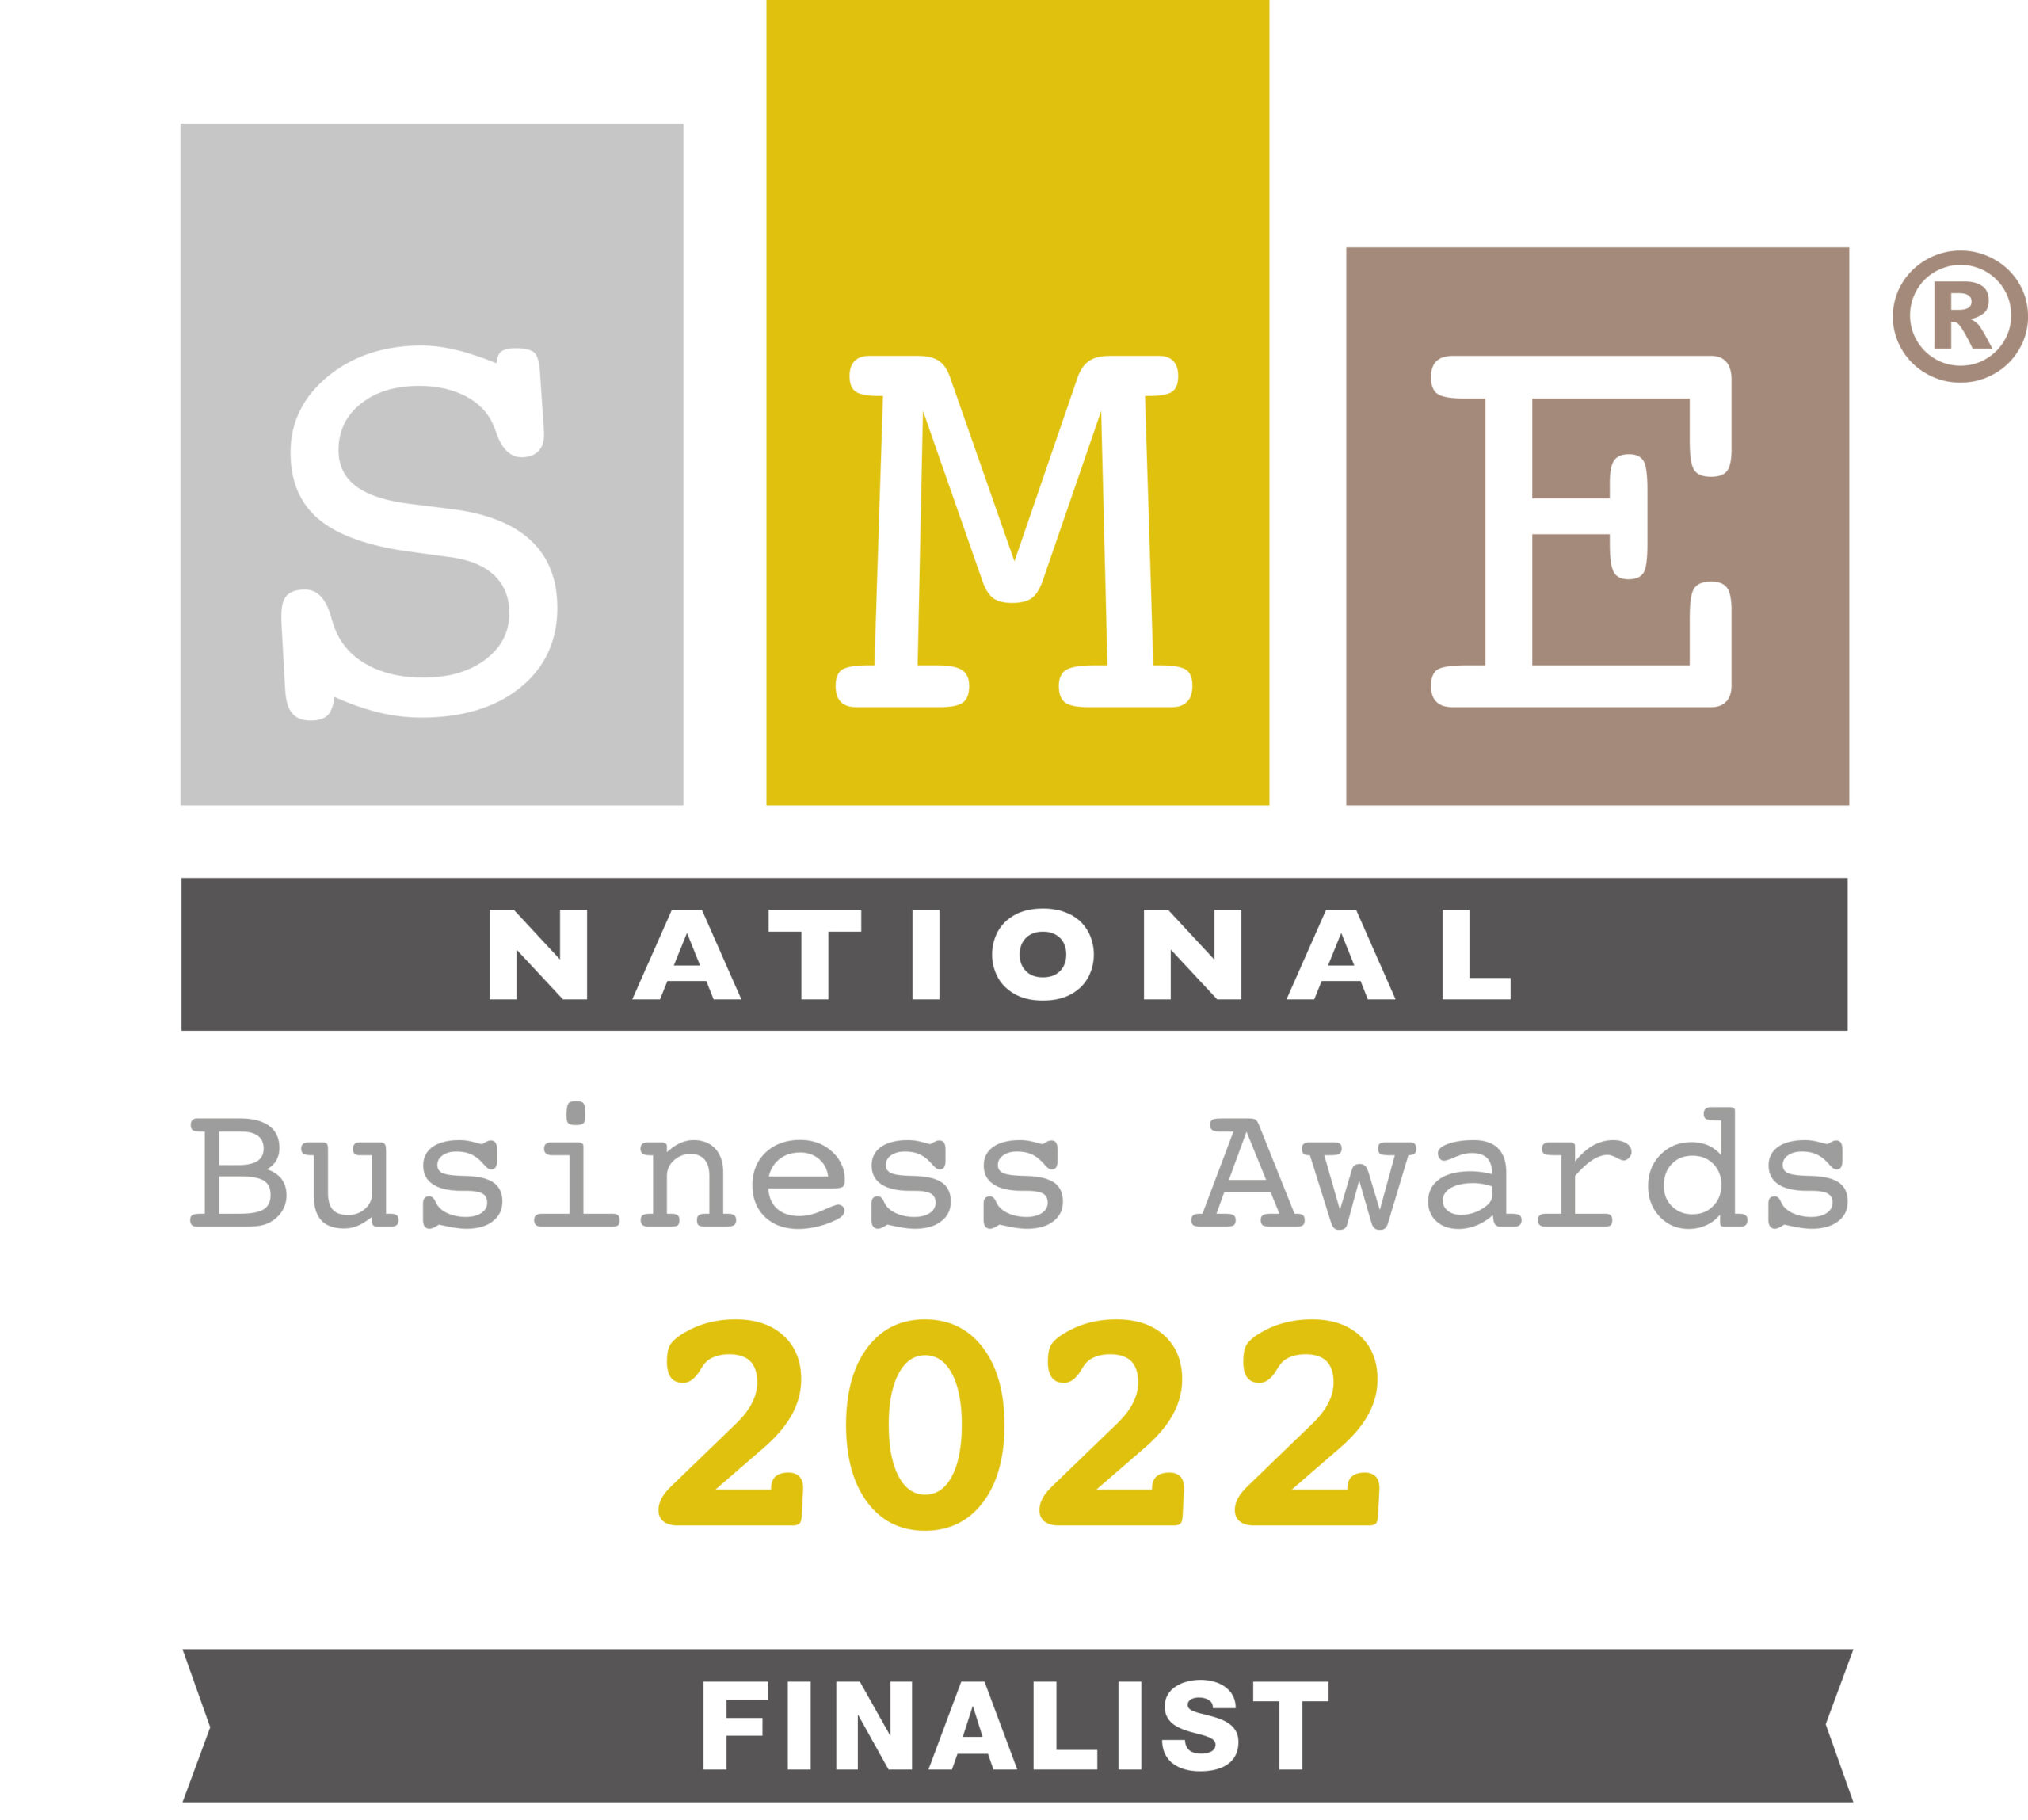 SME Business Awards National Finalist 2022 - Dan Regan Hypnotherapy and Hypnosis Downloads